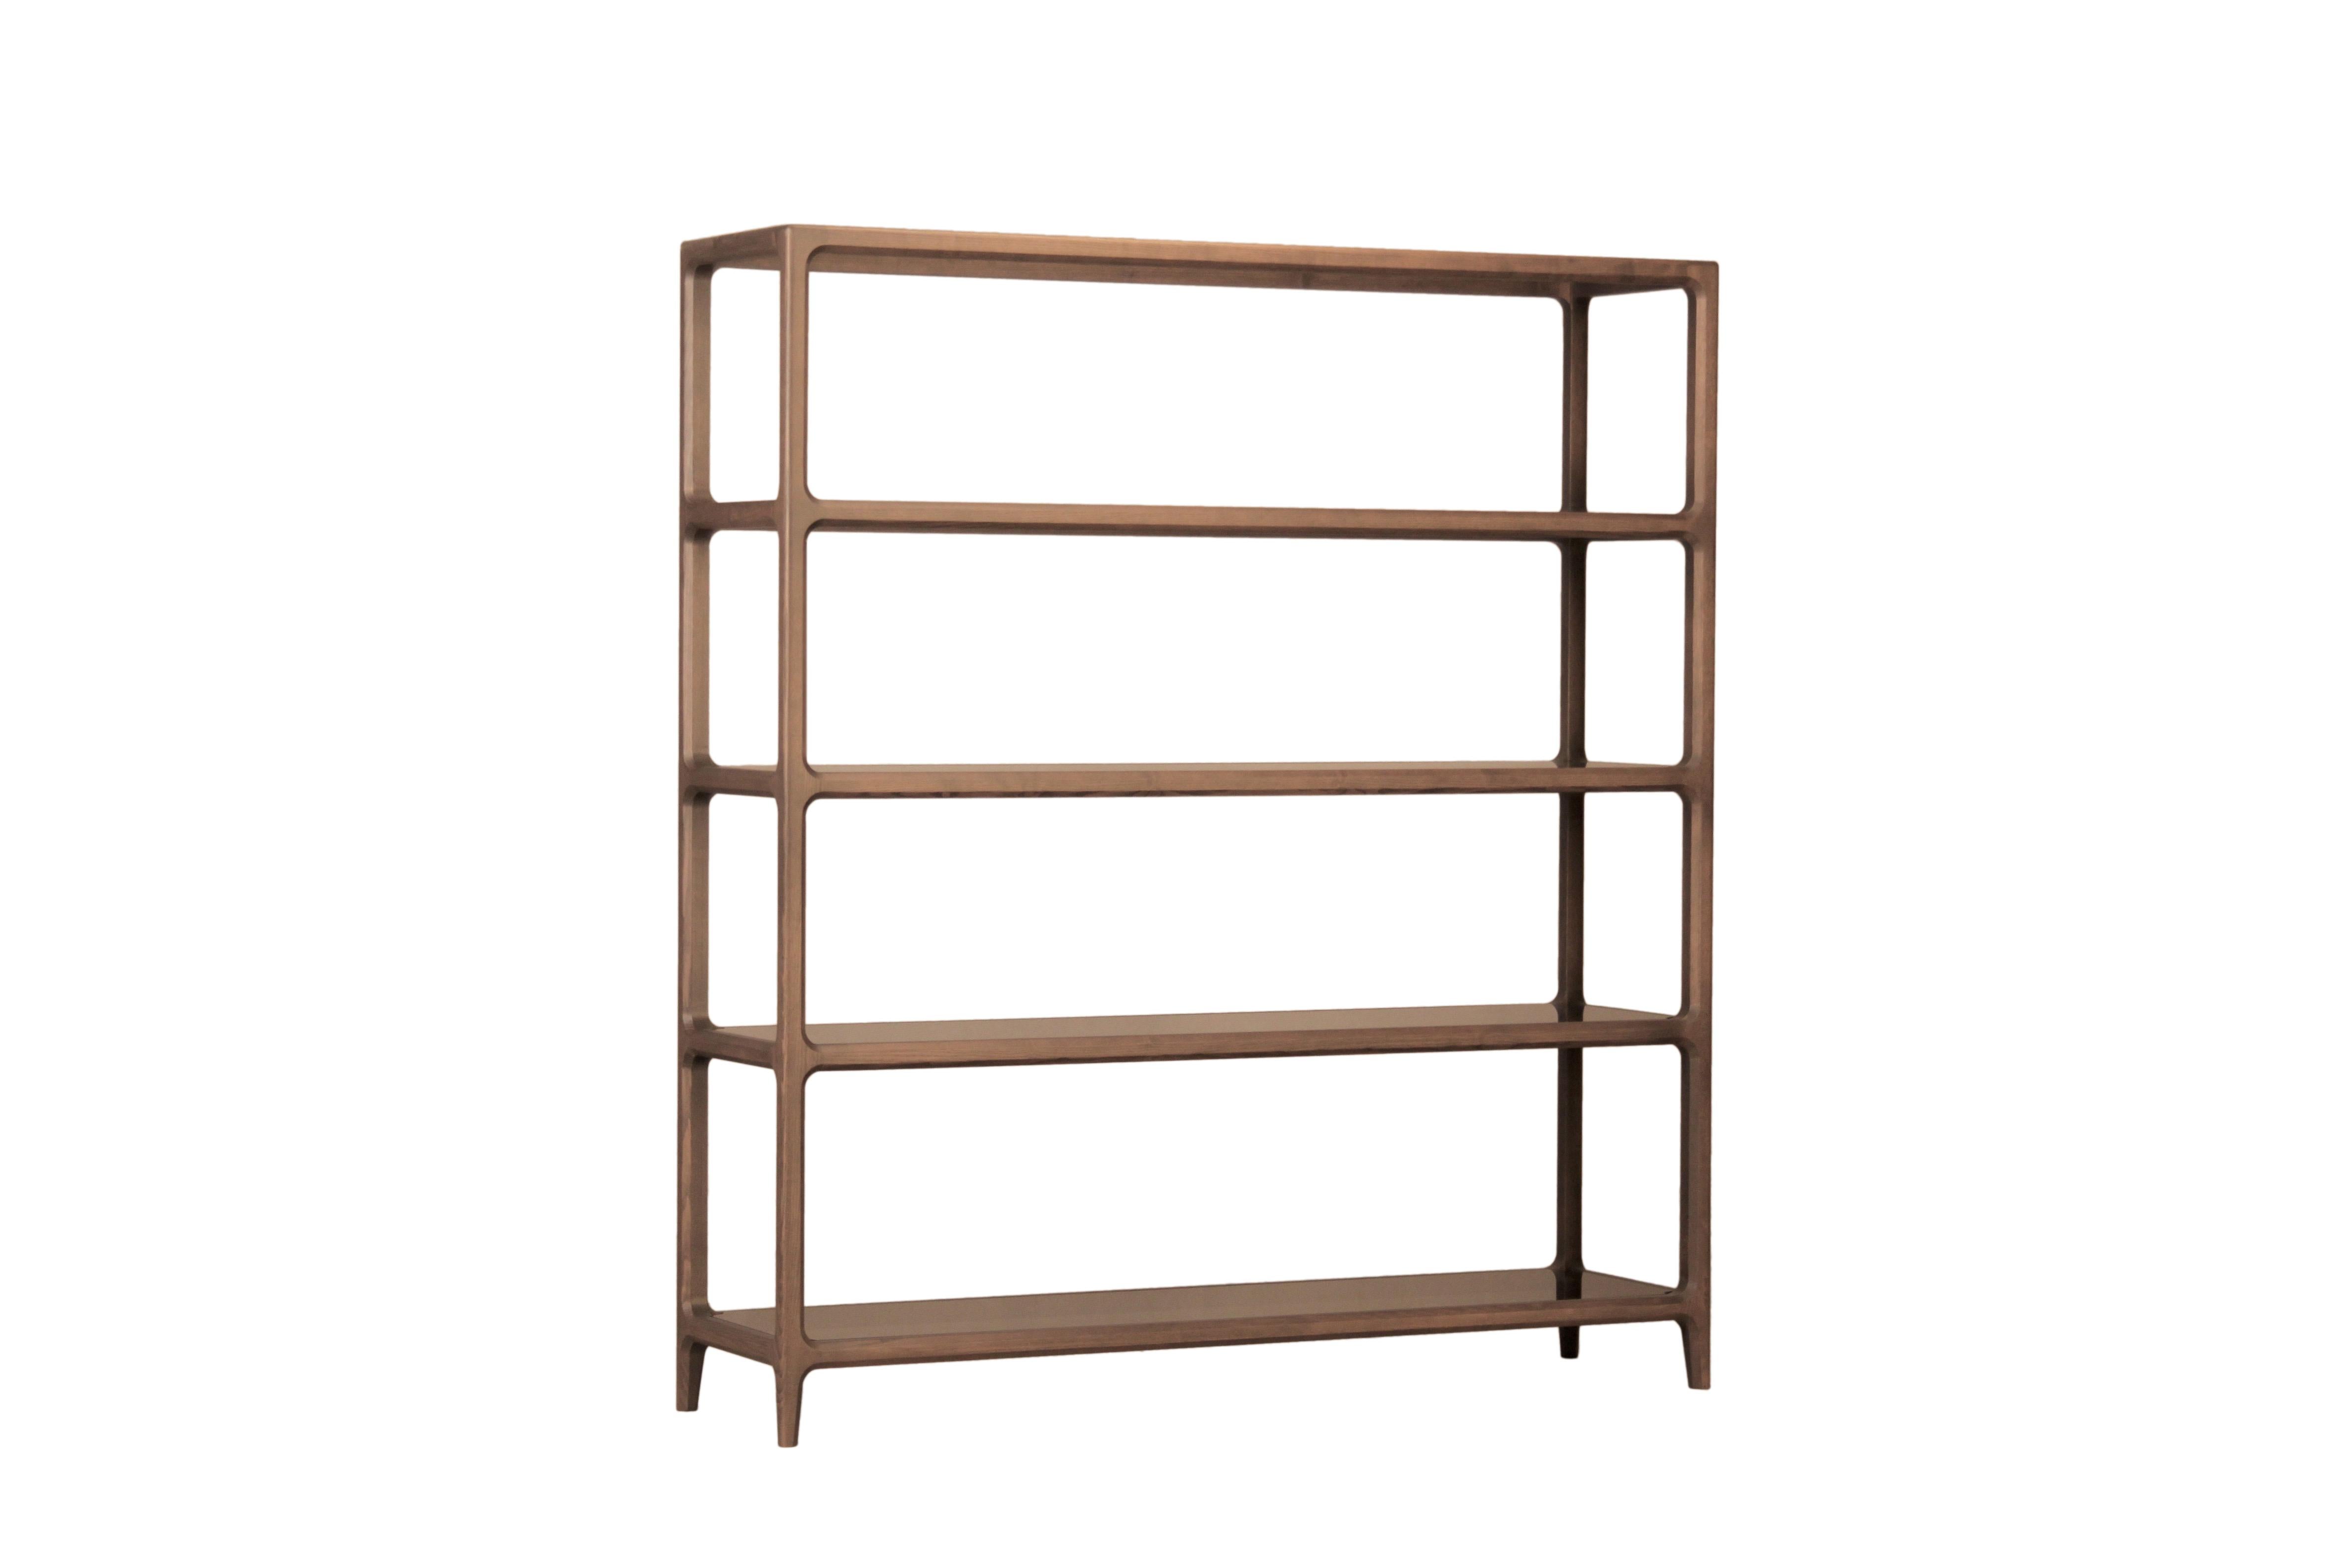 Contemporary style bookcase made of ashwood with glass shelves, characterized by angled bevels, which make the structure thinner and lighter, though resistant.
Available in different wood finishes: natural, oak, walnut, wenge, moka, black.
Smoked,